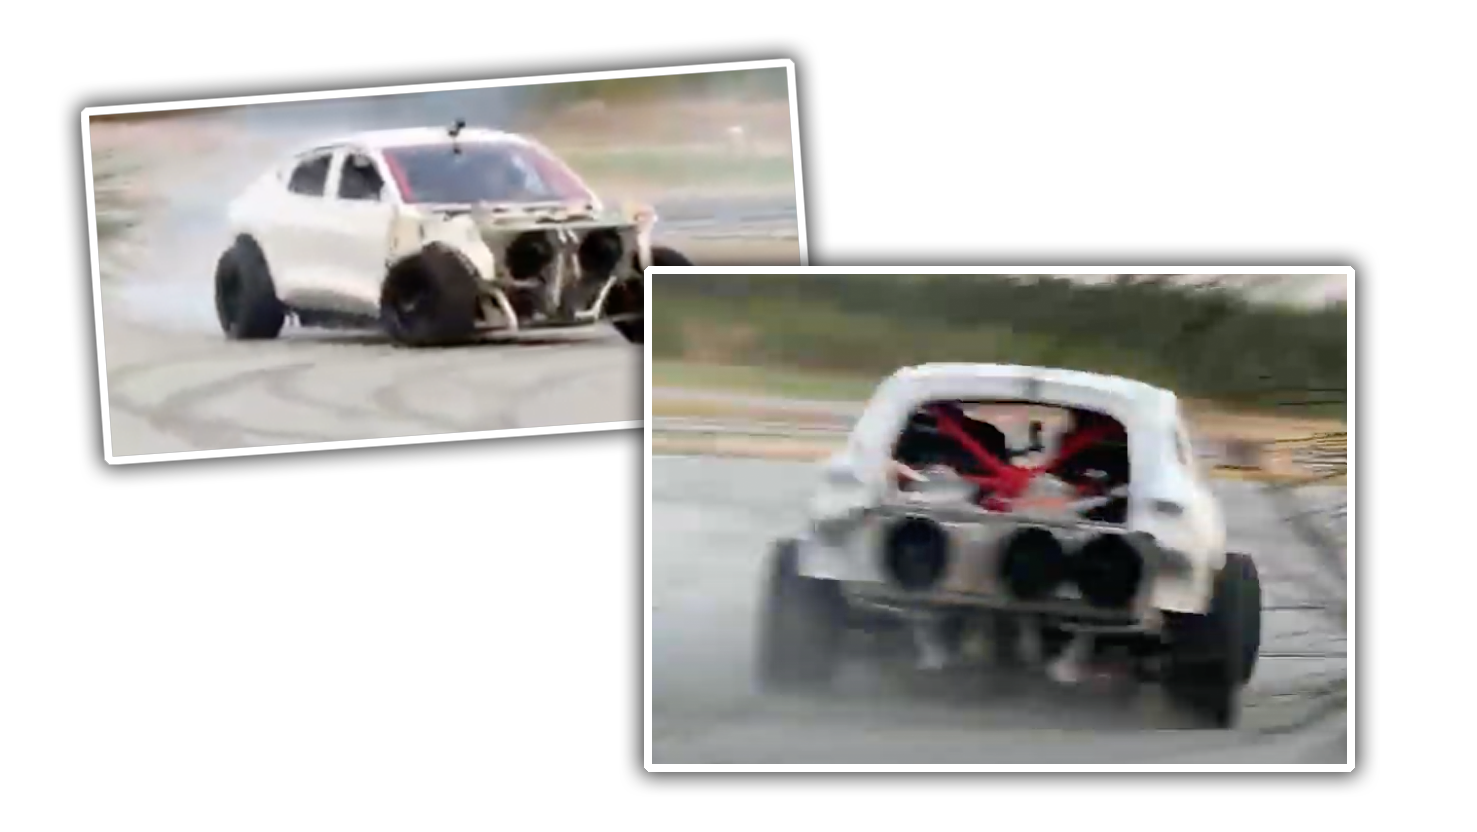 Someone Seems To Be Testing Some Kind Of Mystery Racing Ford Mach-E And It Looks Like A Lot Of Fun